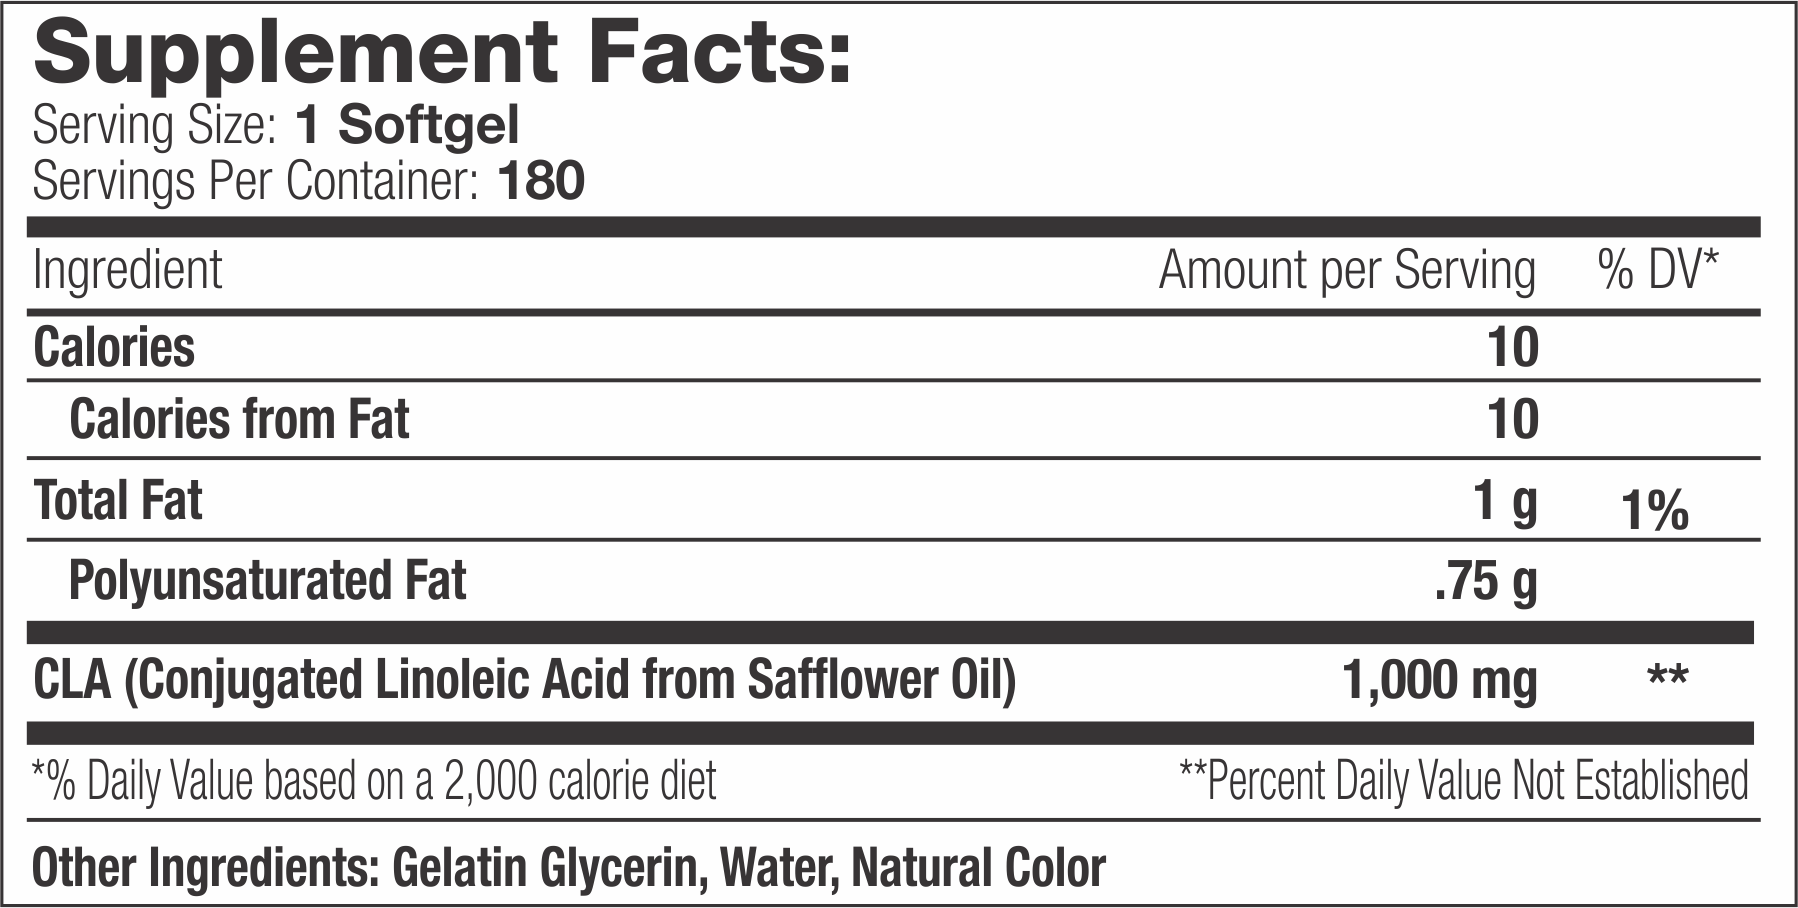 Supplement facts label showing servings, calories, fat details, and CLA from Safflower Oil in one softgel serving.